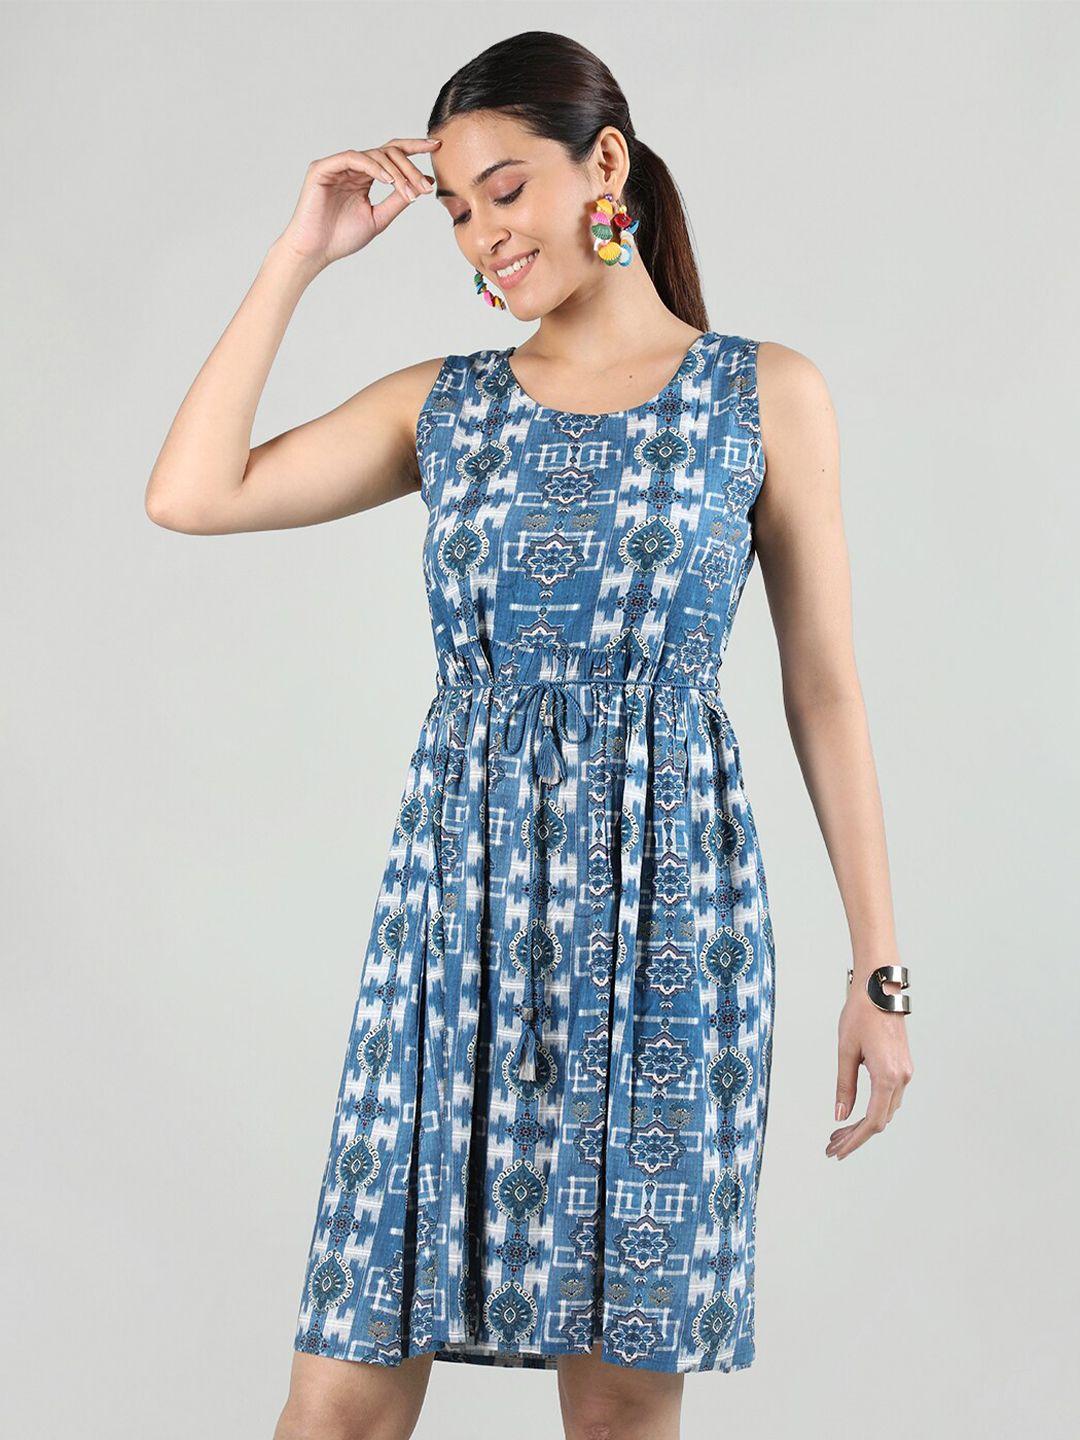 rage ethnic motifs printed cut-out & tie-up detail fit & flare dress